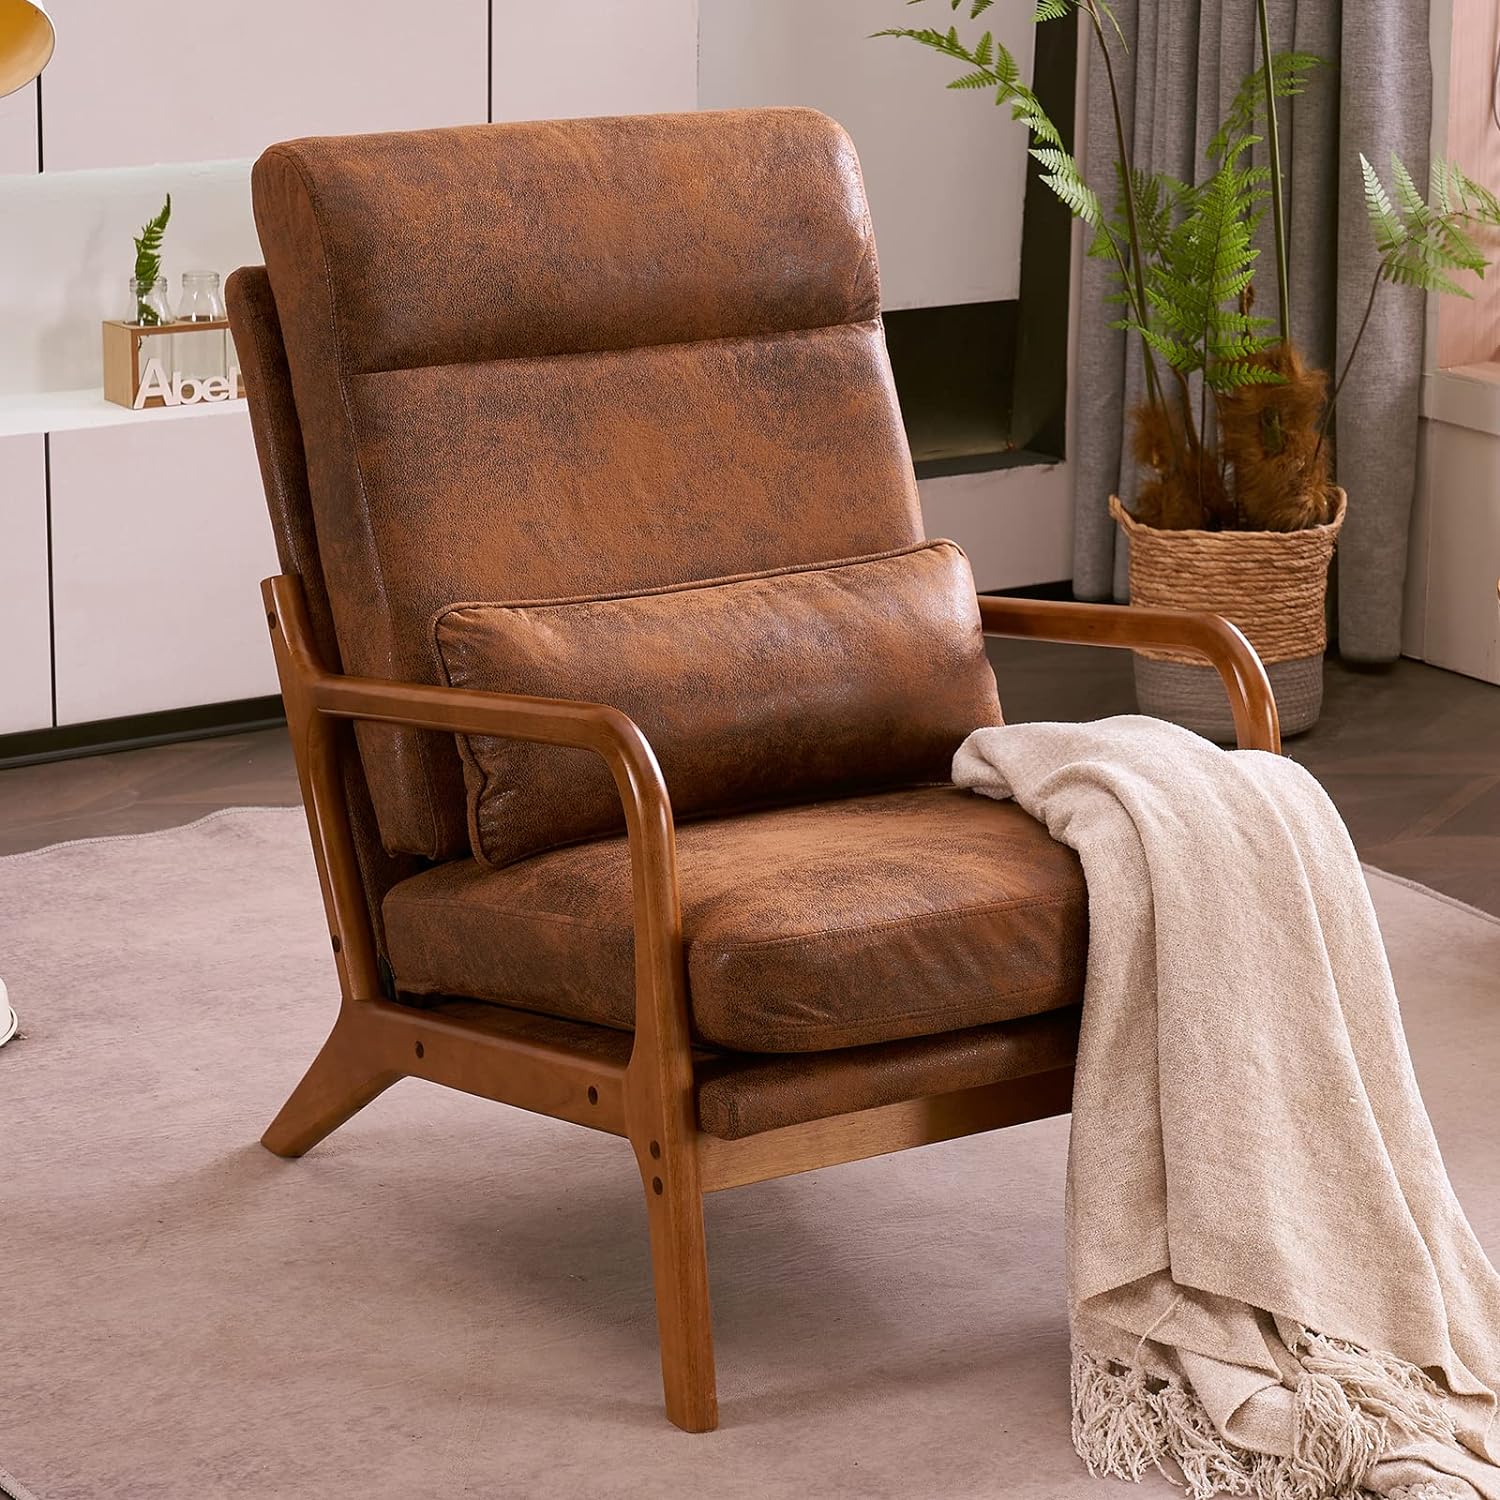 pazezog Accent Armchair for Living Room